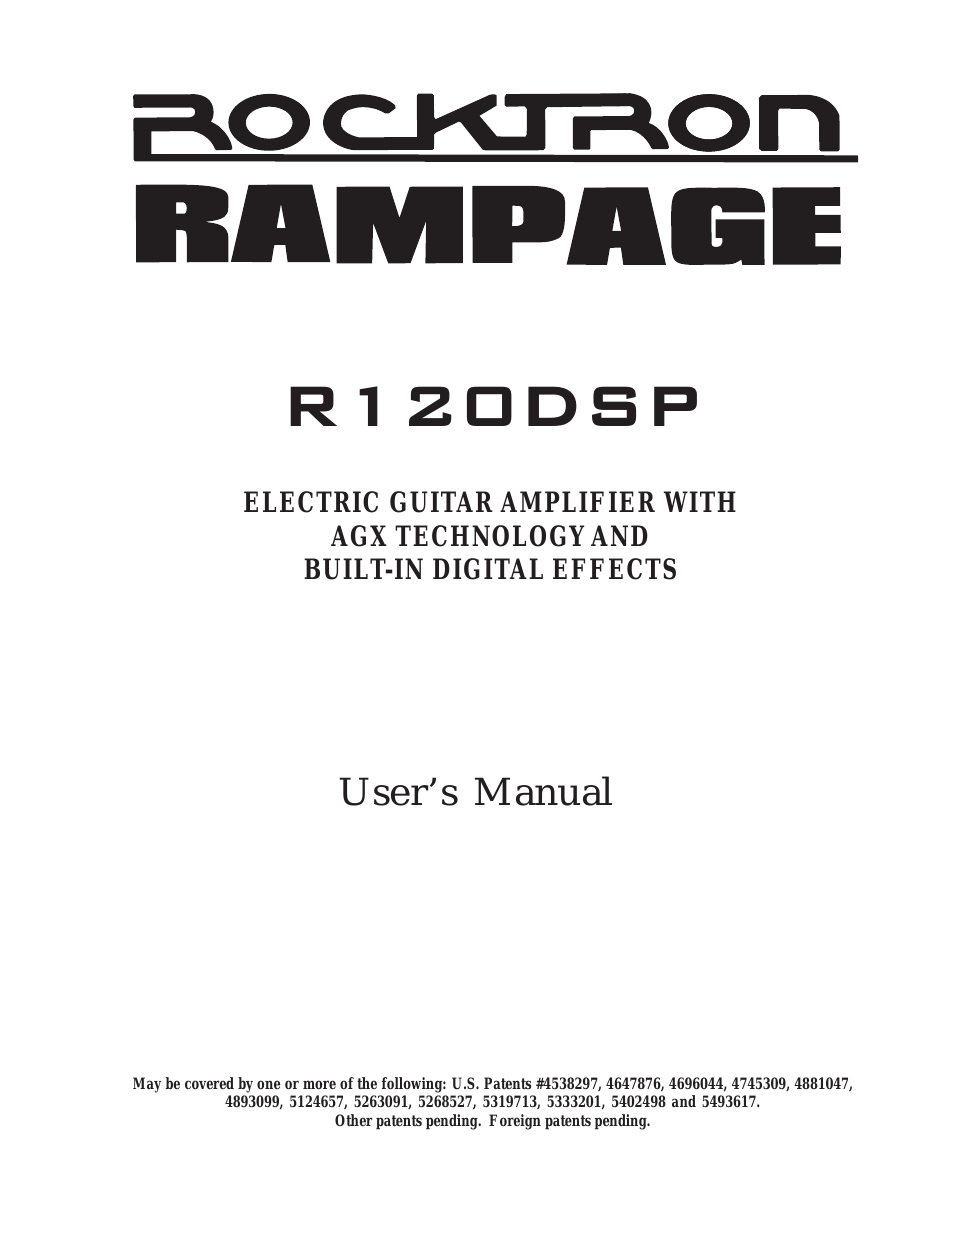 Rampage R120 DSP